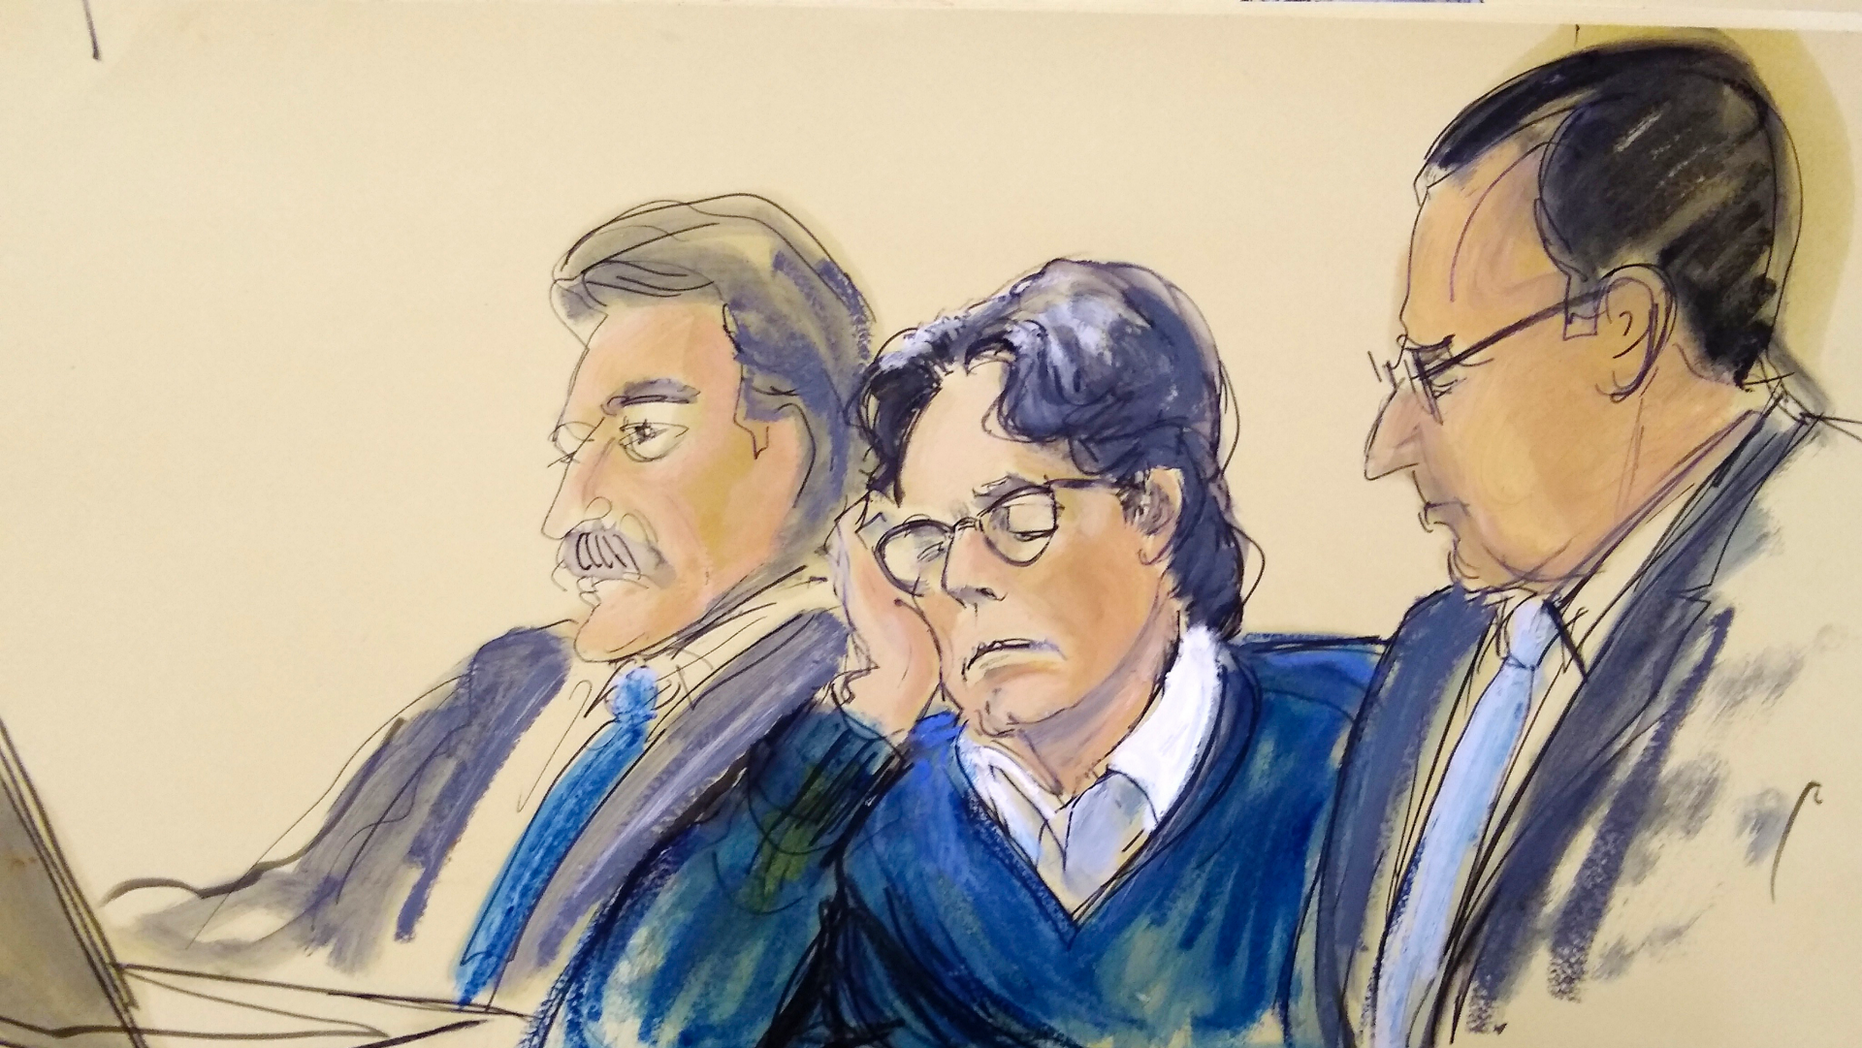 NXIVM leader guilty on all charges